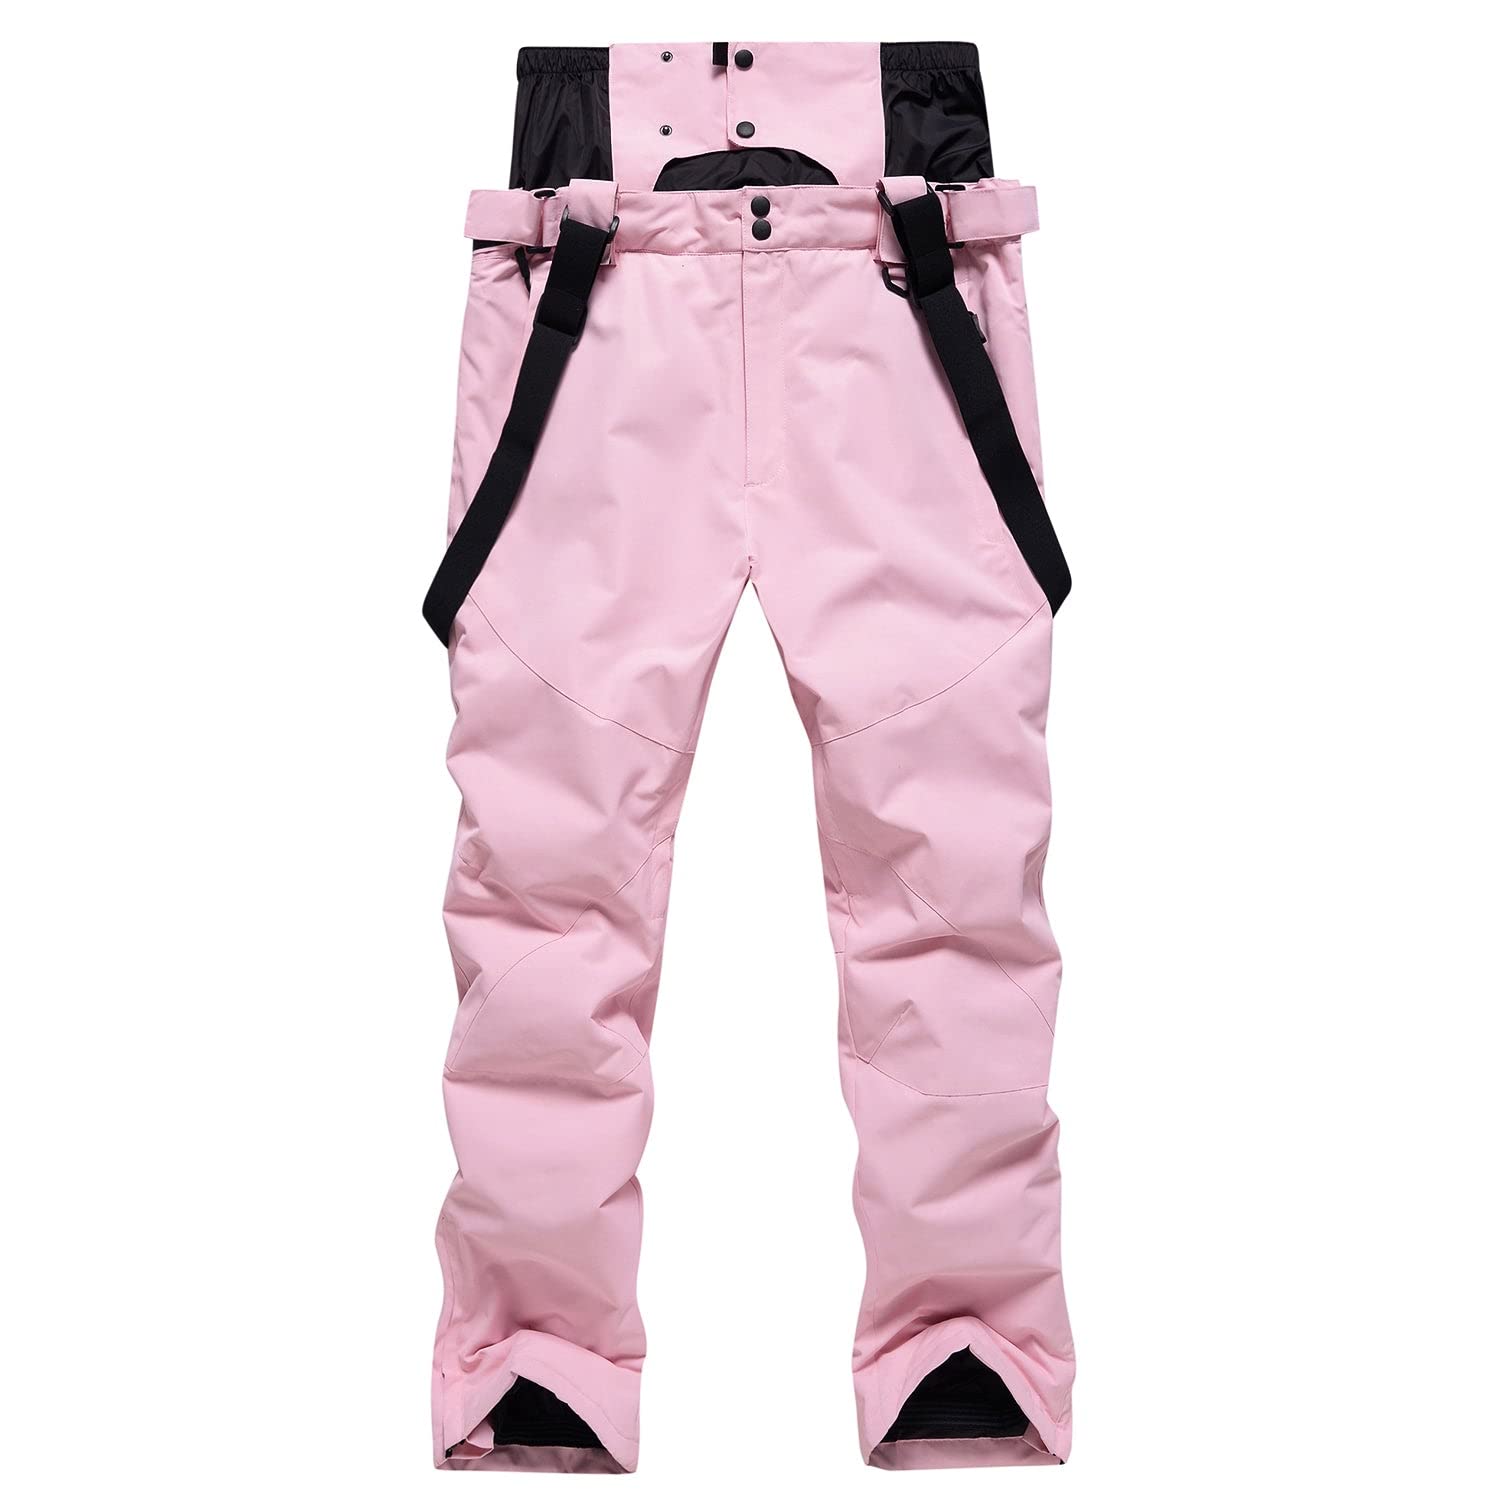 Women's Snow Pants Waterproof Insulated,Ski Pants with Detachable  Suspenders for Skiing,Snowboarding,Snowmobiling